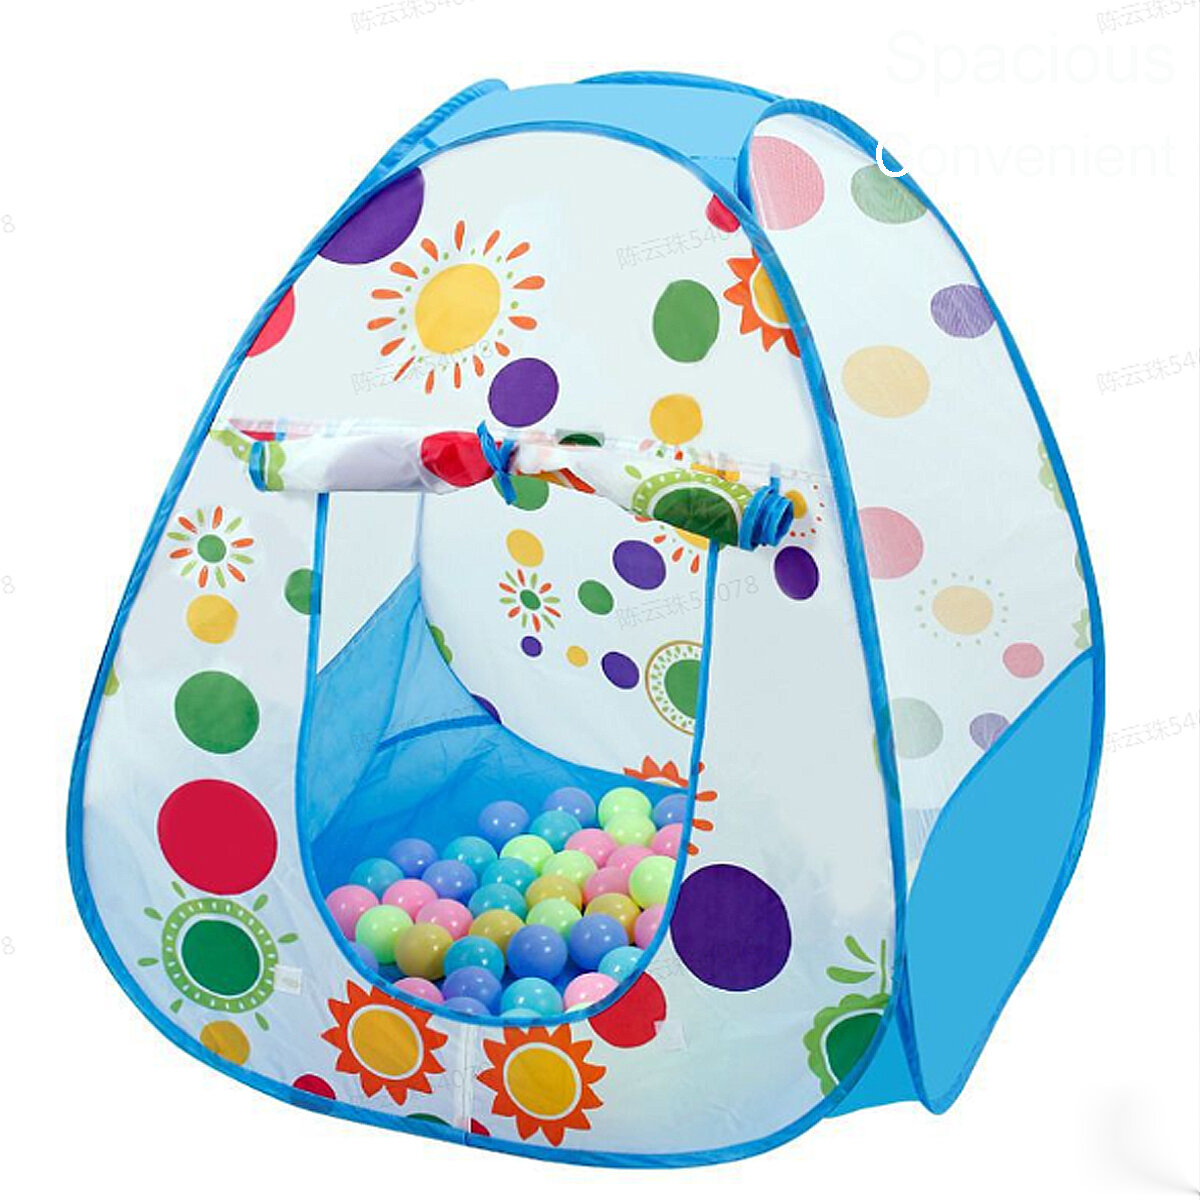 Image of 3 In1 Baby Tent Kid Crawling Tunnel Play Tent House Ball Pit Pool Tent for Children Toy Ball Pool Ocean Ball Holder Set